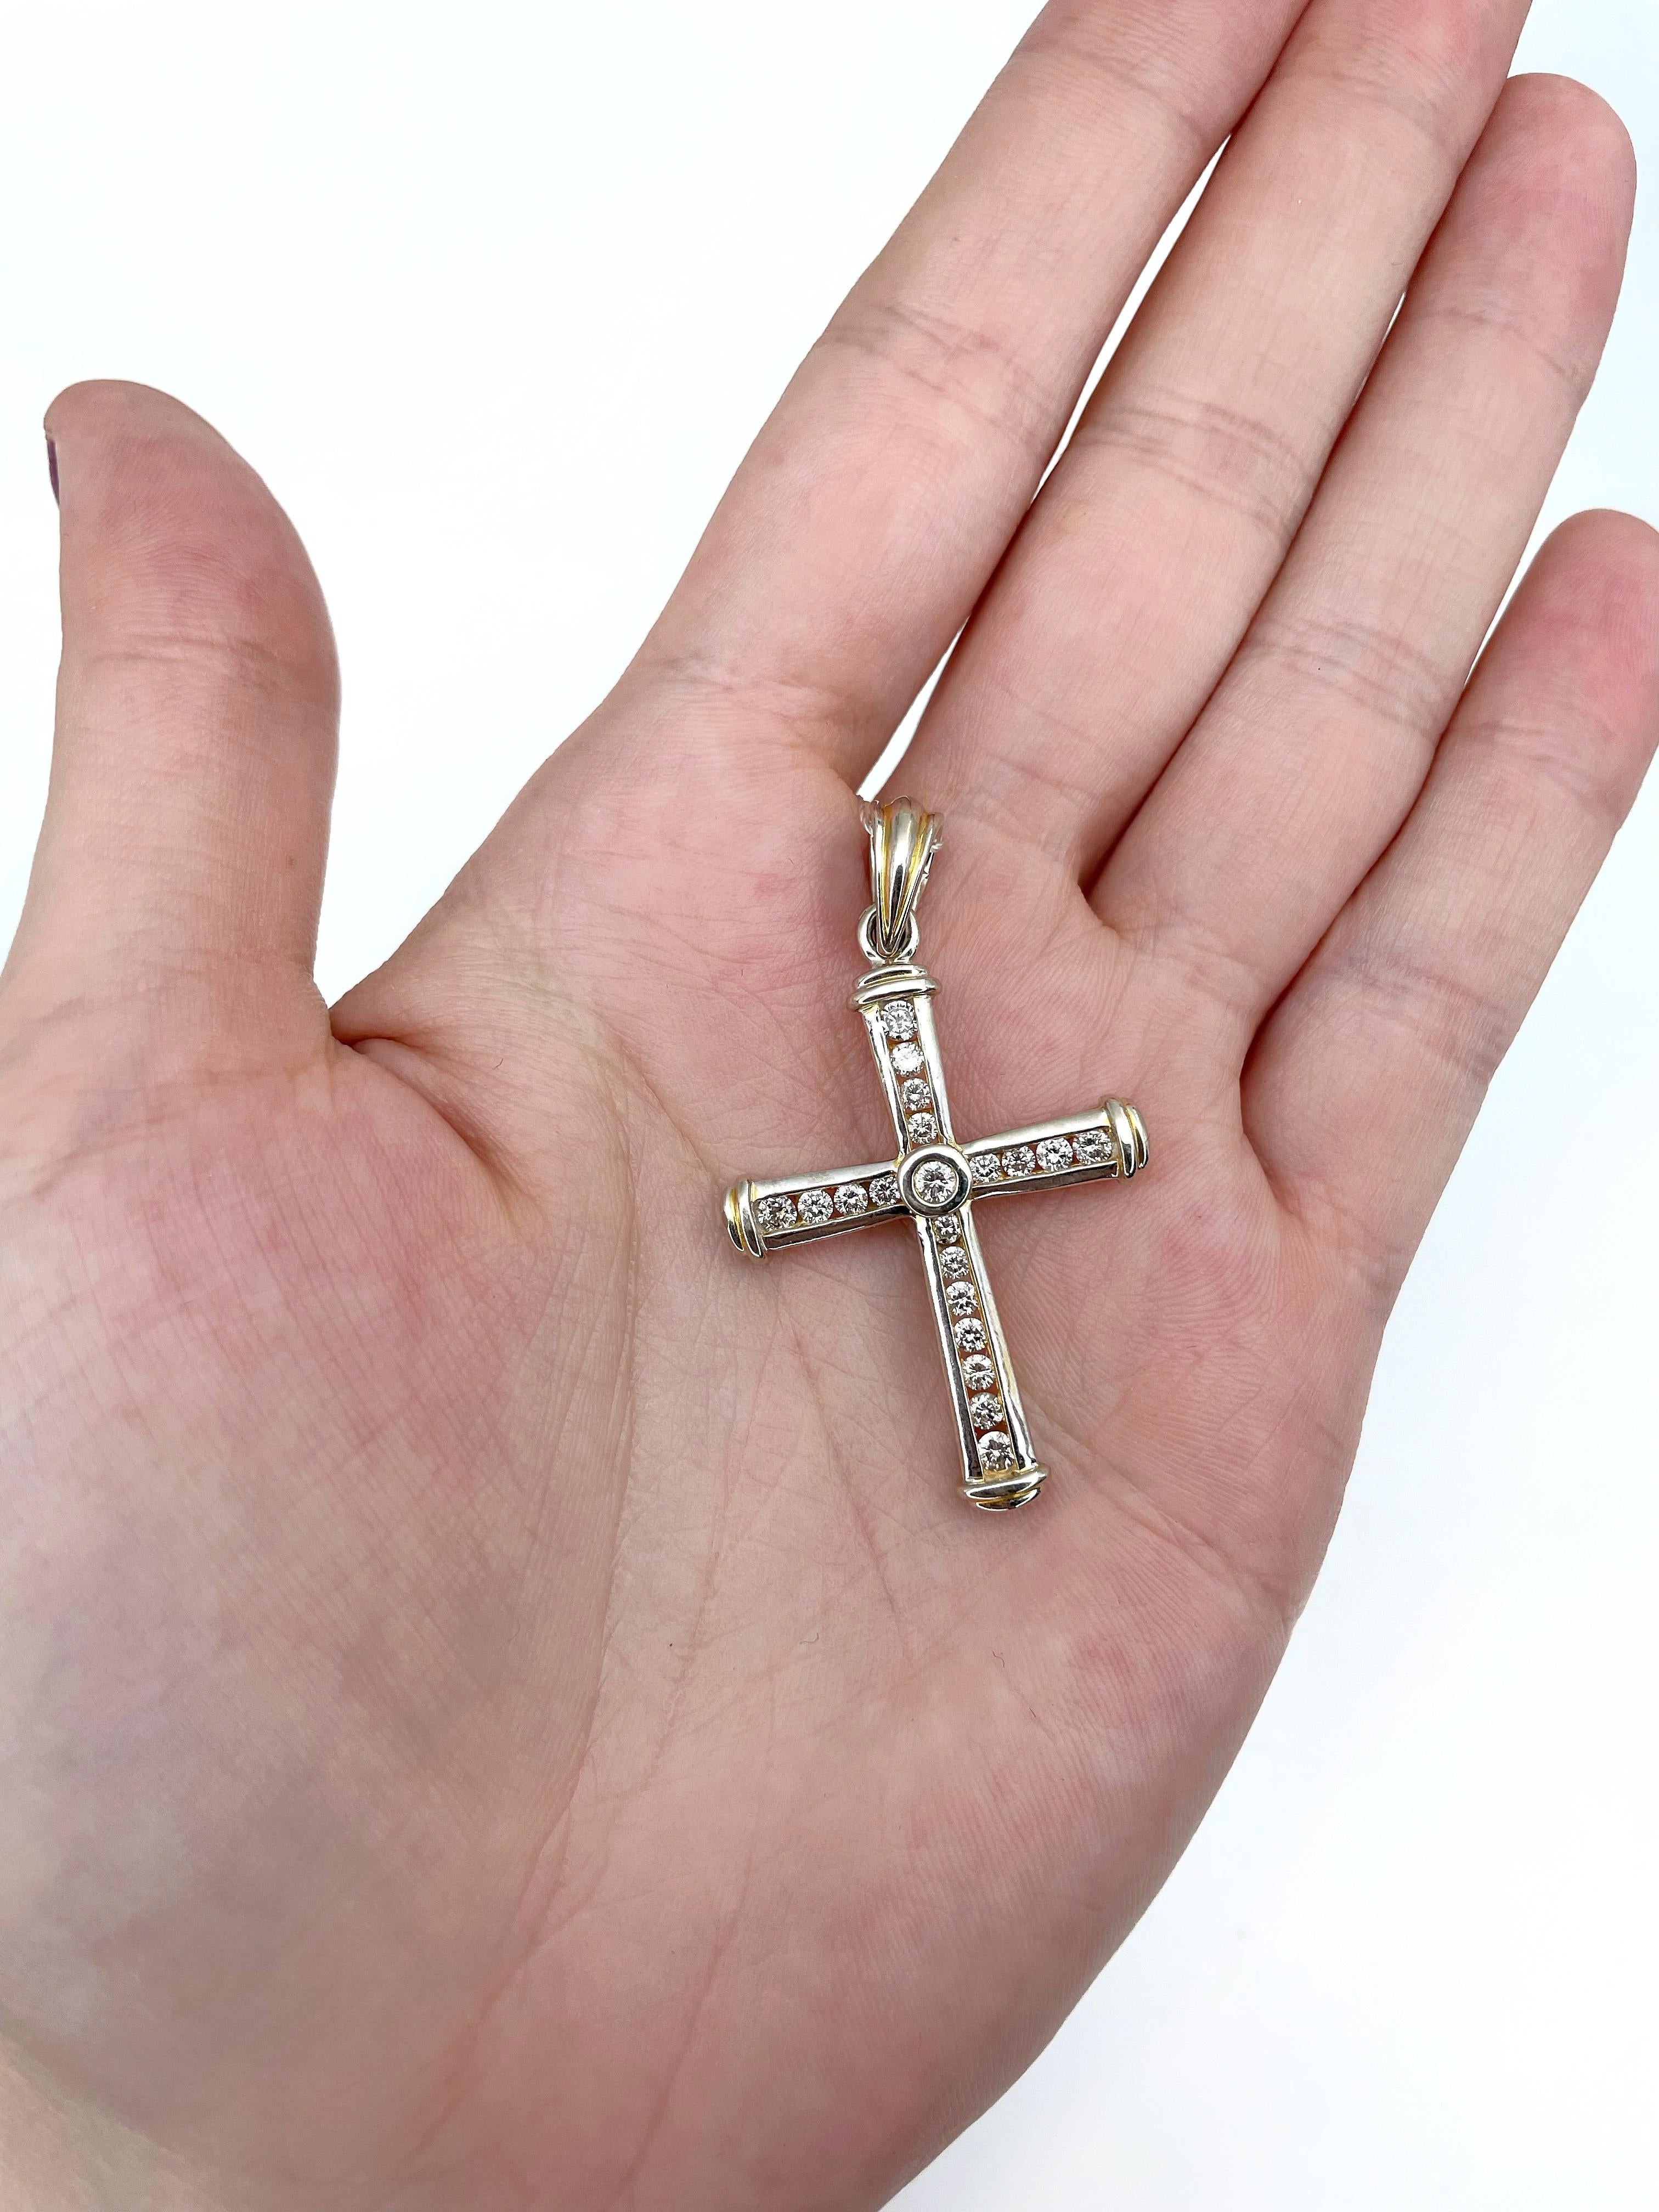 This is a classic design cross pendant crafted in 9K gold. It features 20 pcs. brilliant cut diamonds: TW 1.00ct, STW-Tinted W, SI-P2.
 
Circa 1970

Weight: 6.10g
Size: 5x2.8cm

———

If you have any questions, please feel free to ask. We describe